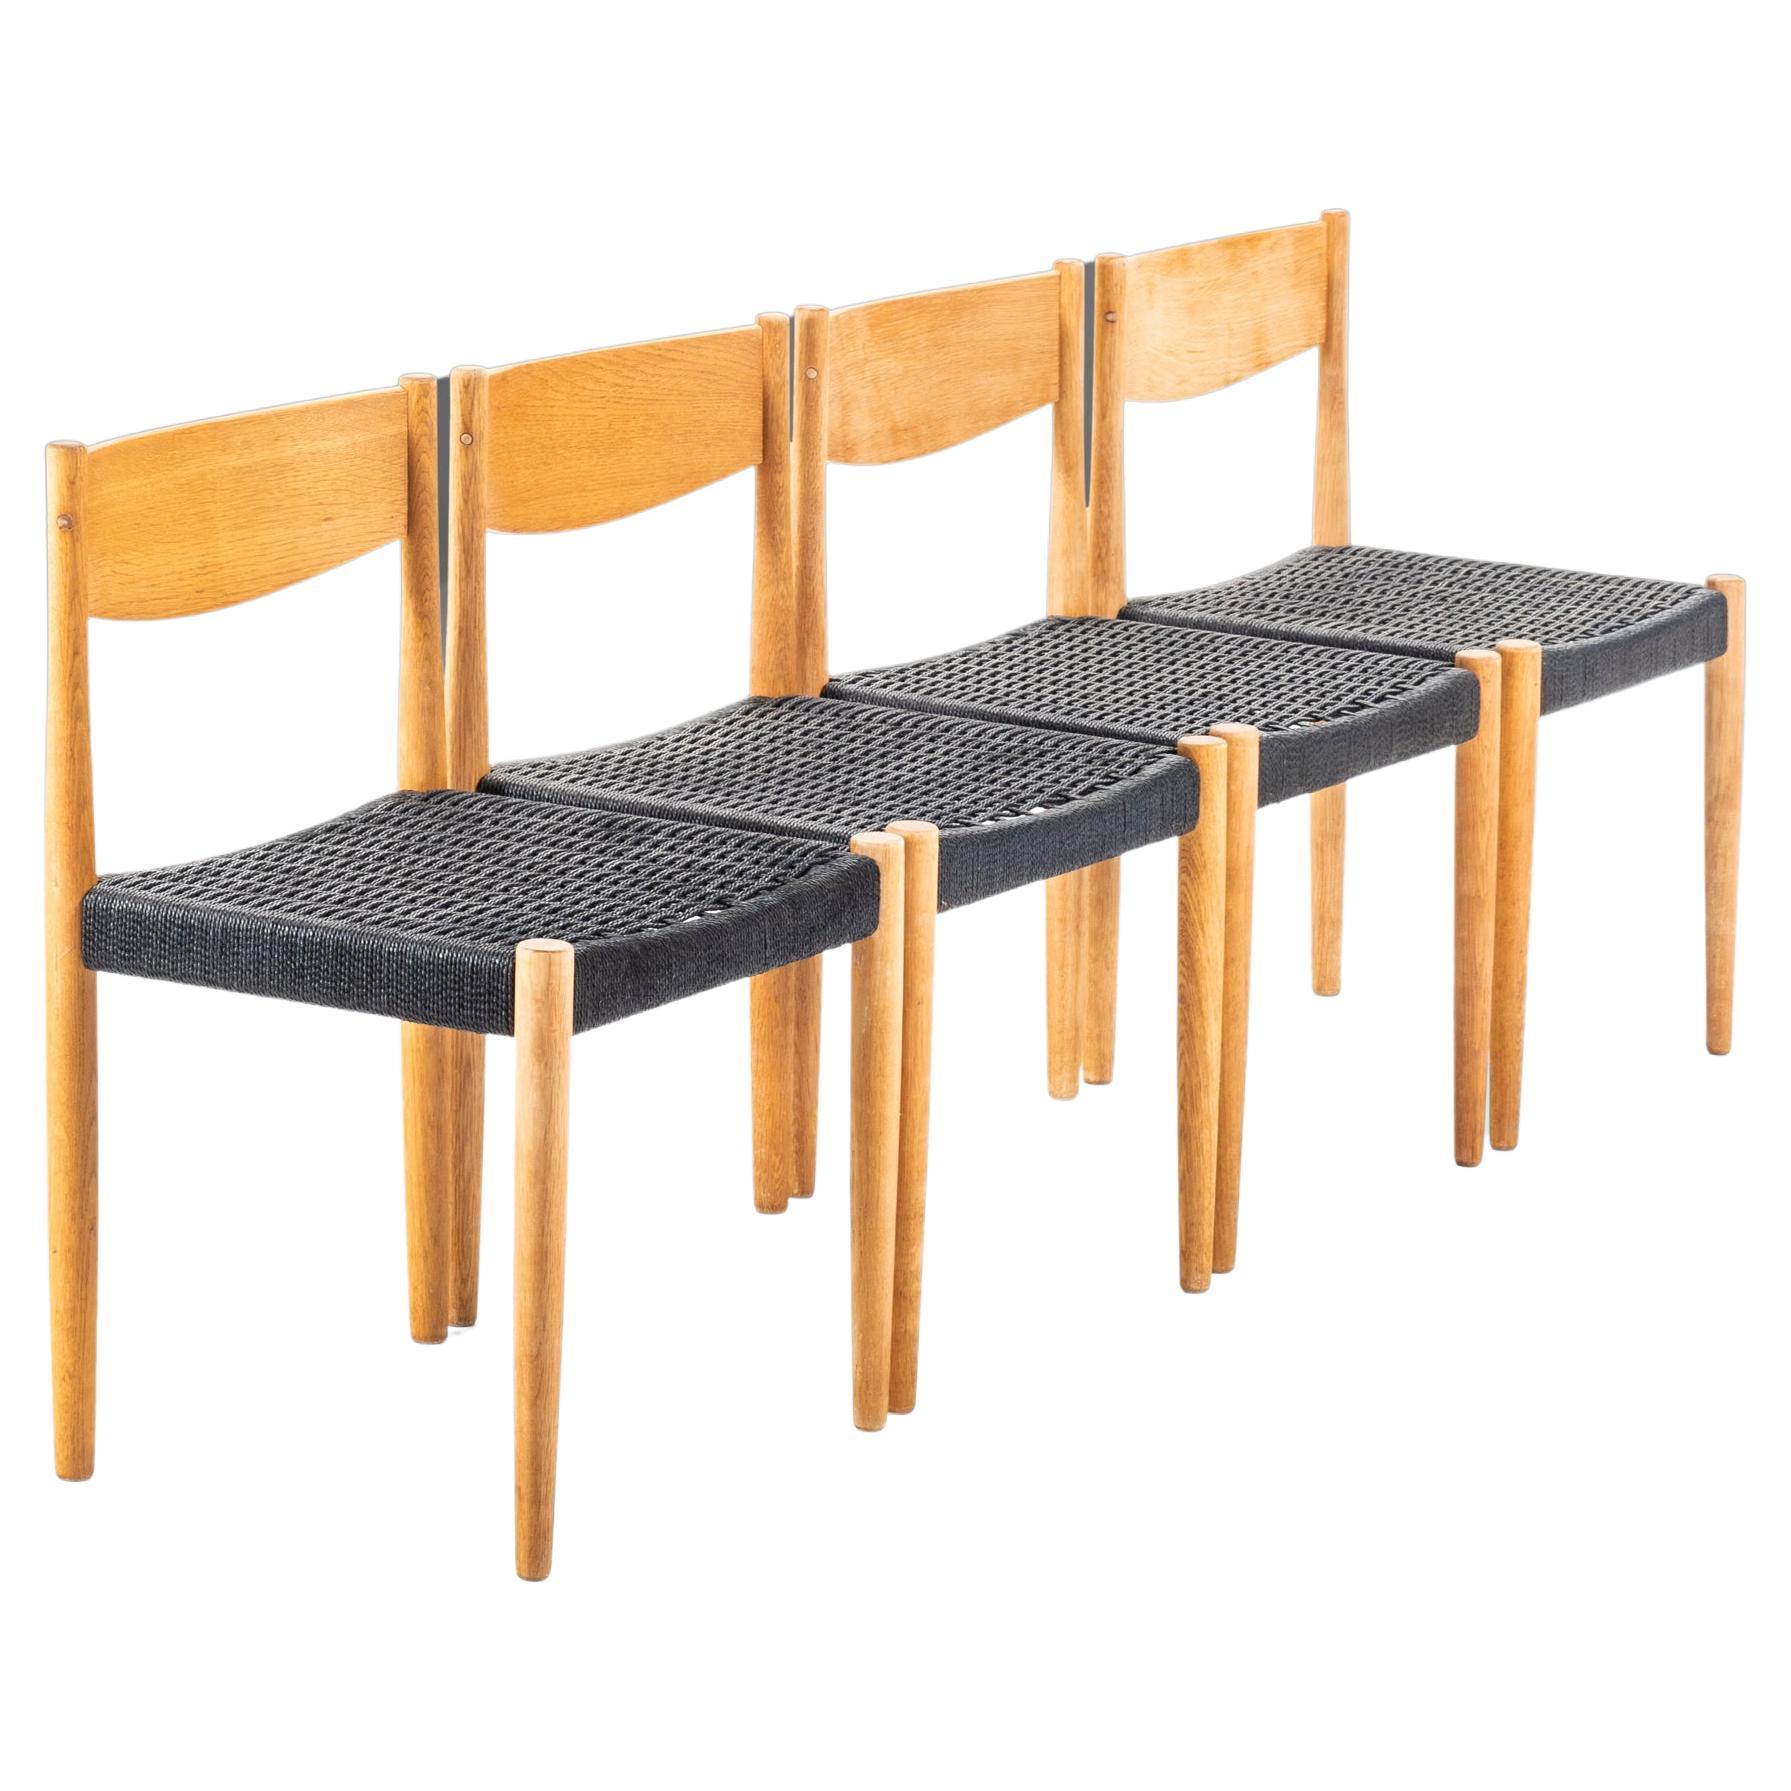 Set of Four (4) Poul Volther for Frem Rojle Danish Modern Dining Chairs, Denmark